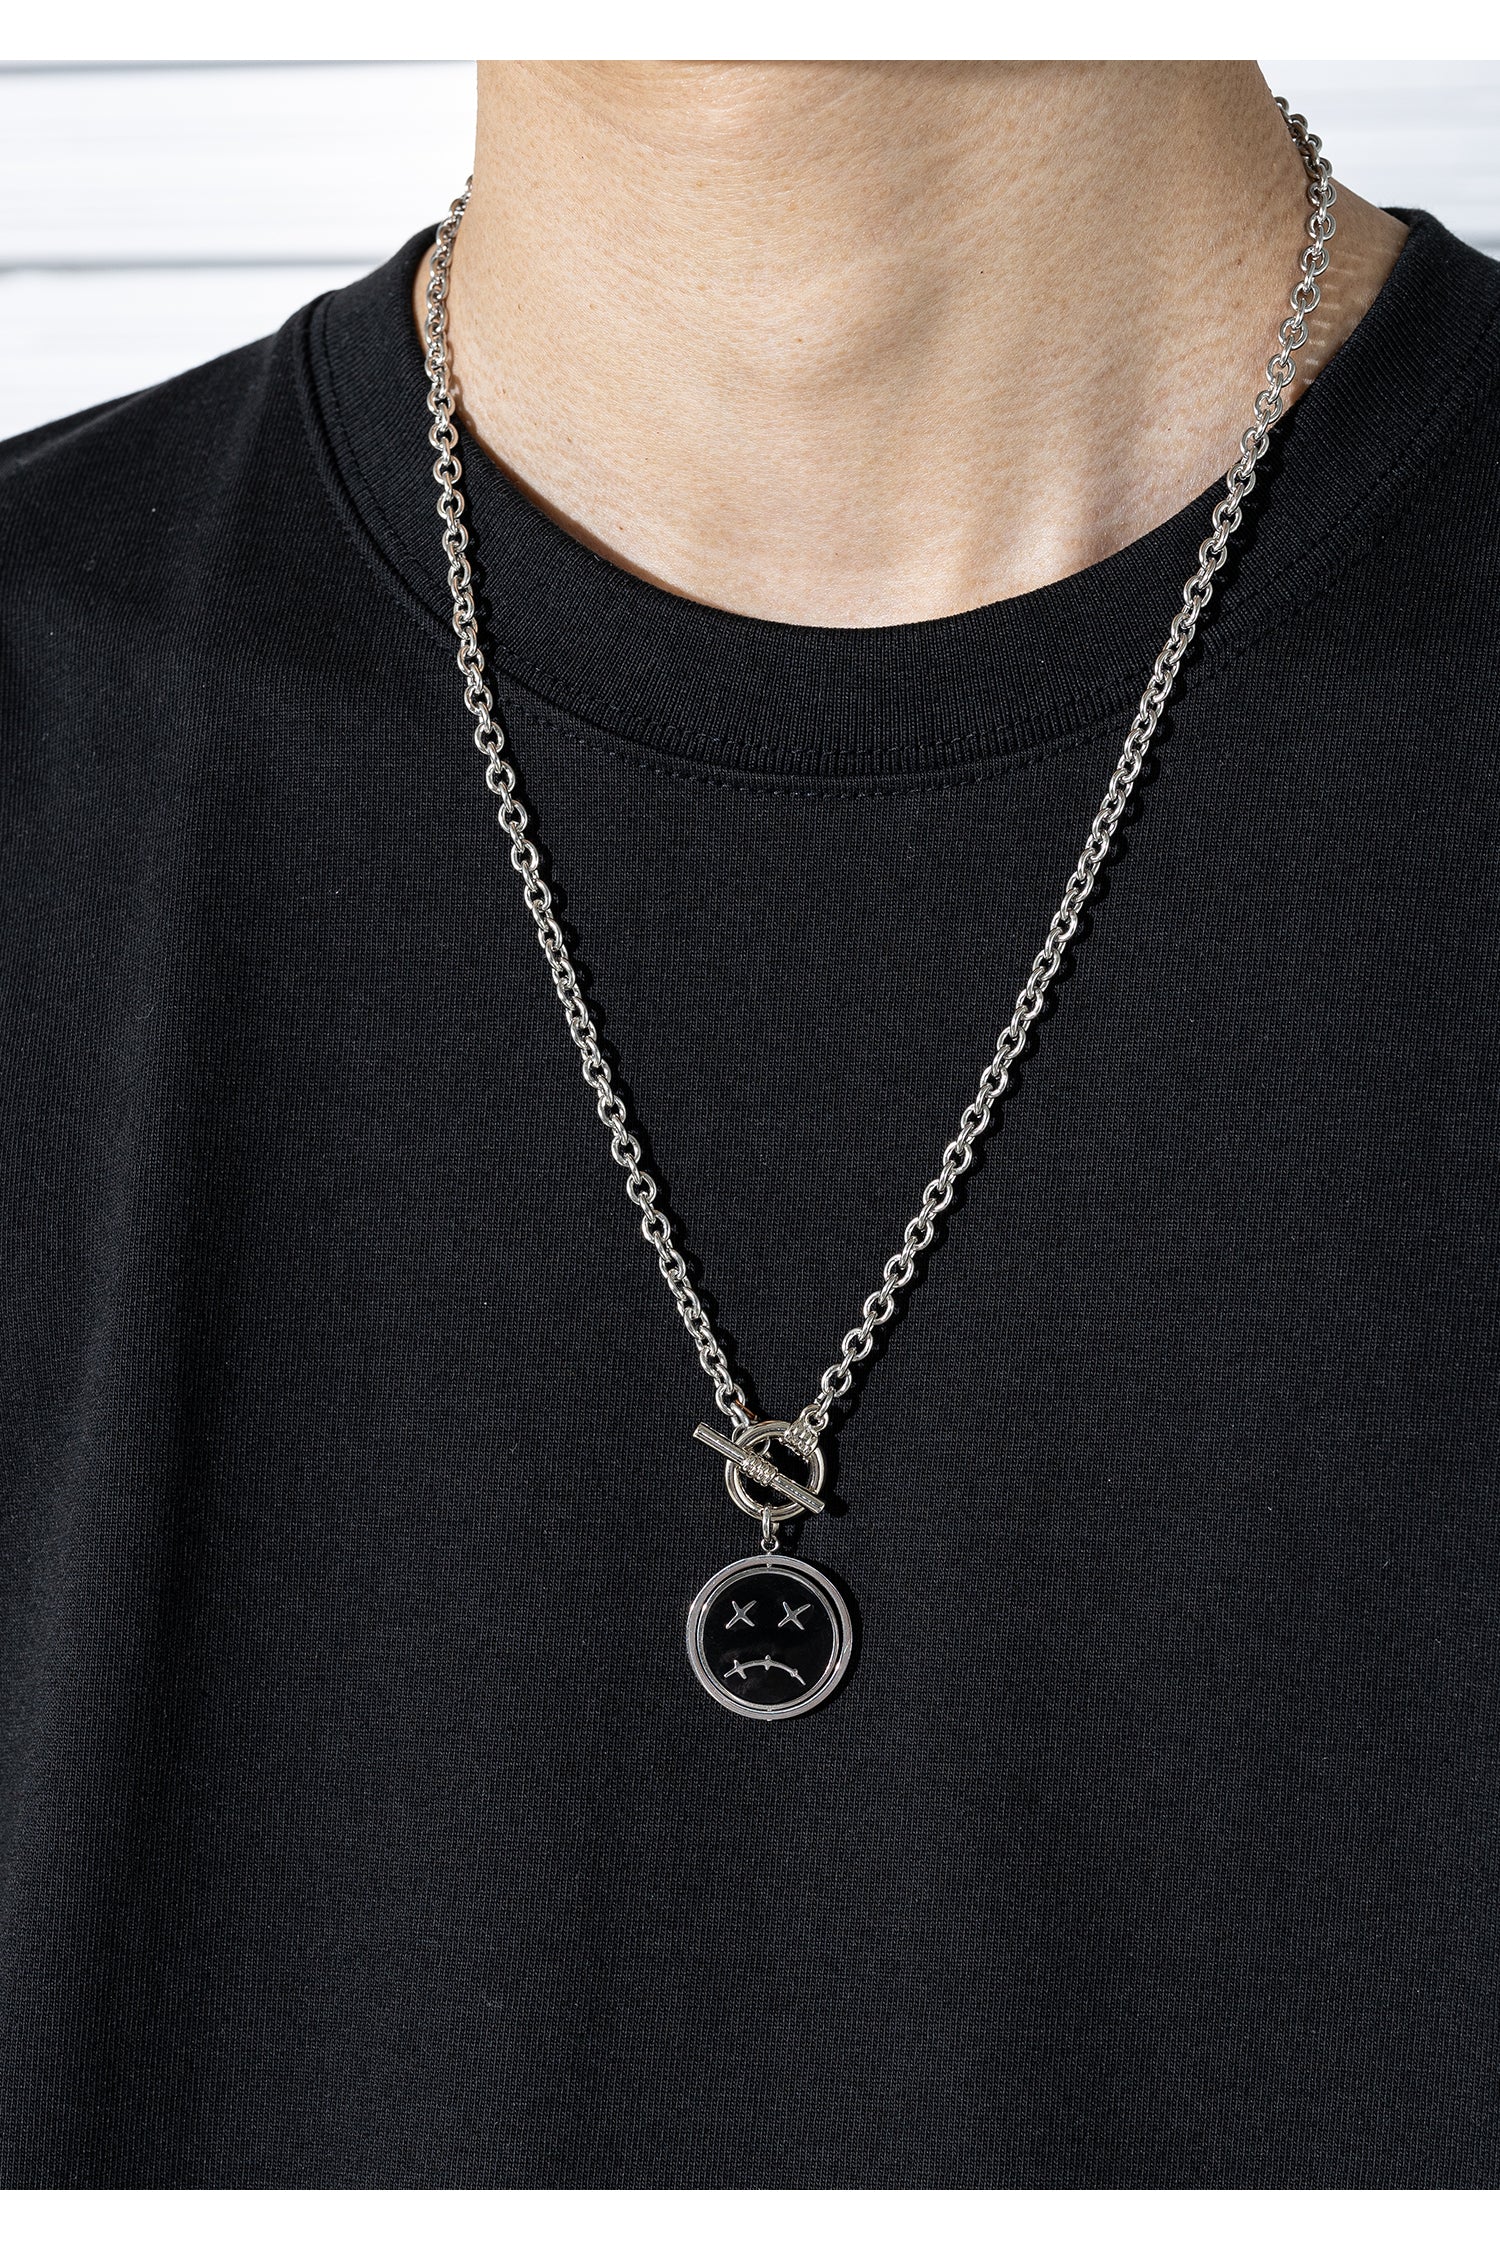 DOUBLE DIEBOY ANCHOR CHAIN NECKLACE